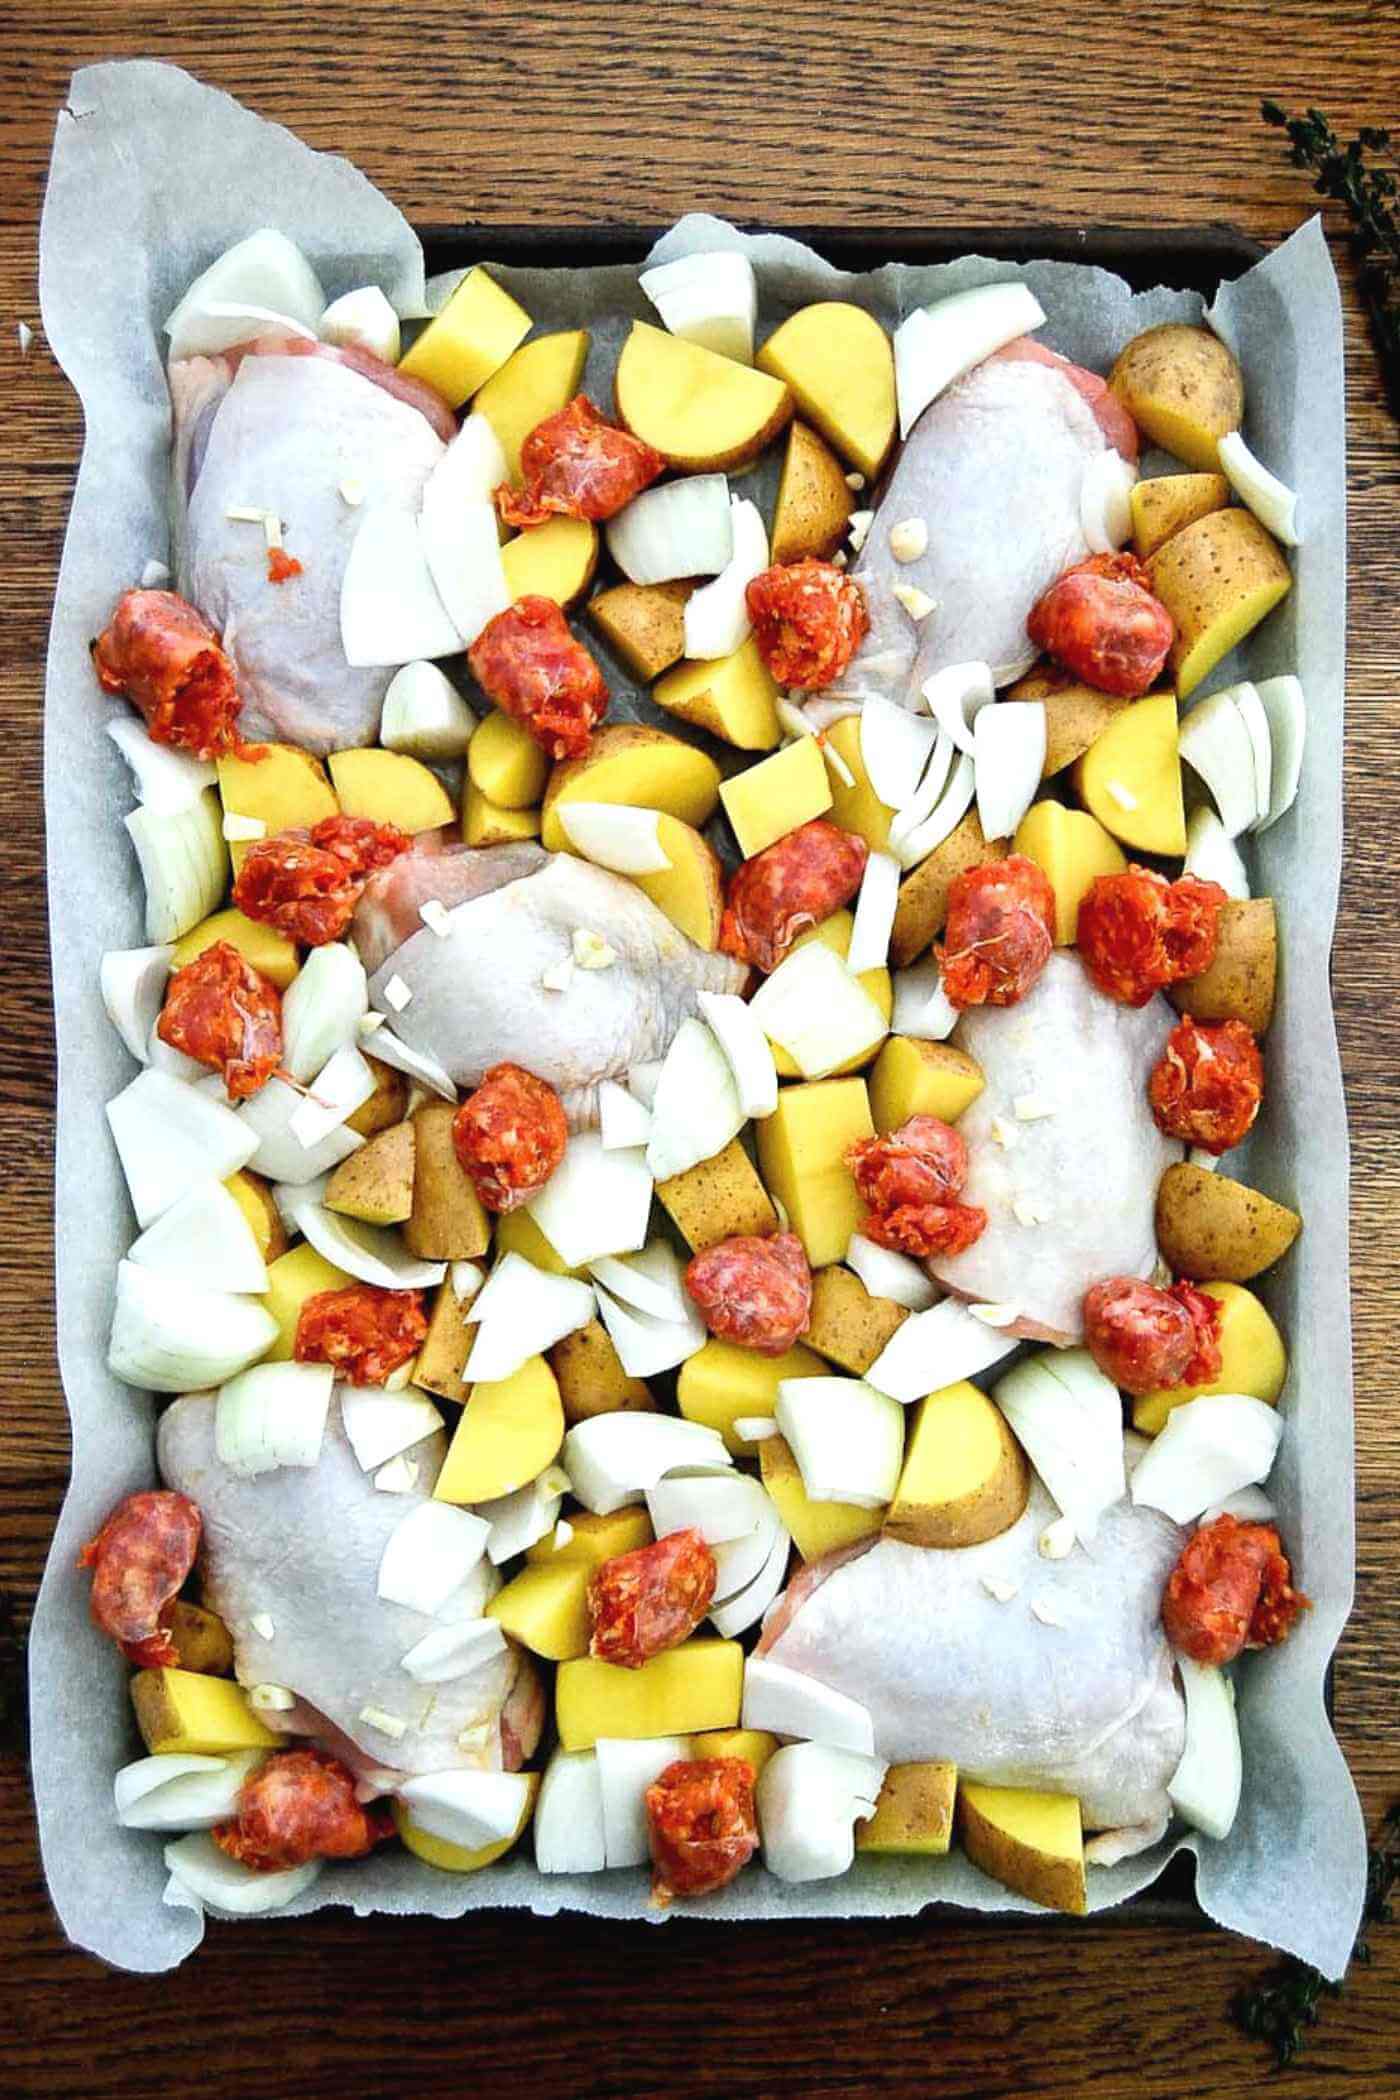 chicken thighs, potatoes, onion and sausage on sheet pan.